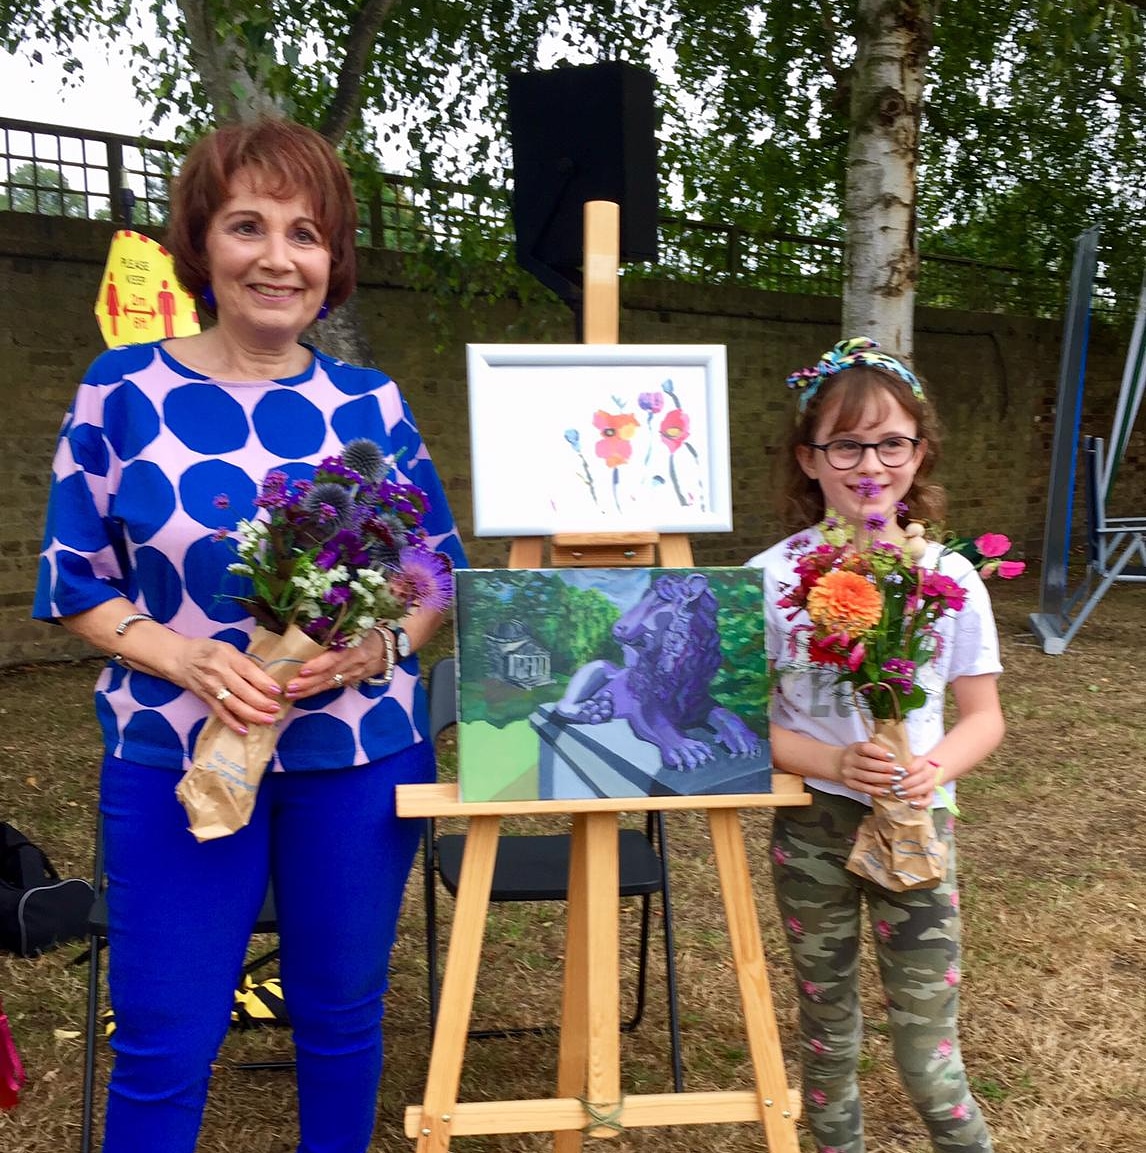 Congratulations to winners of #ChiswickHouseArtComp chosen by @Chiswick_House artist in residence Michèle Noach. Here's Jenny Glenton, winner of adult category, & Taylor Beau Nolan, winner in children’s category & their wonderful artworks #welovechiswickhouse